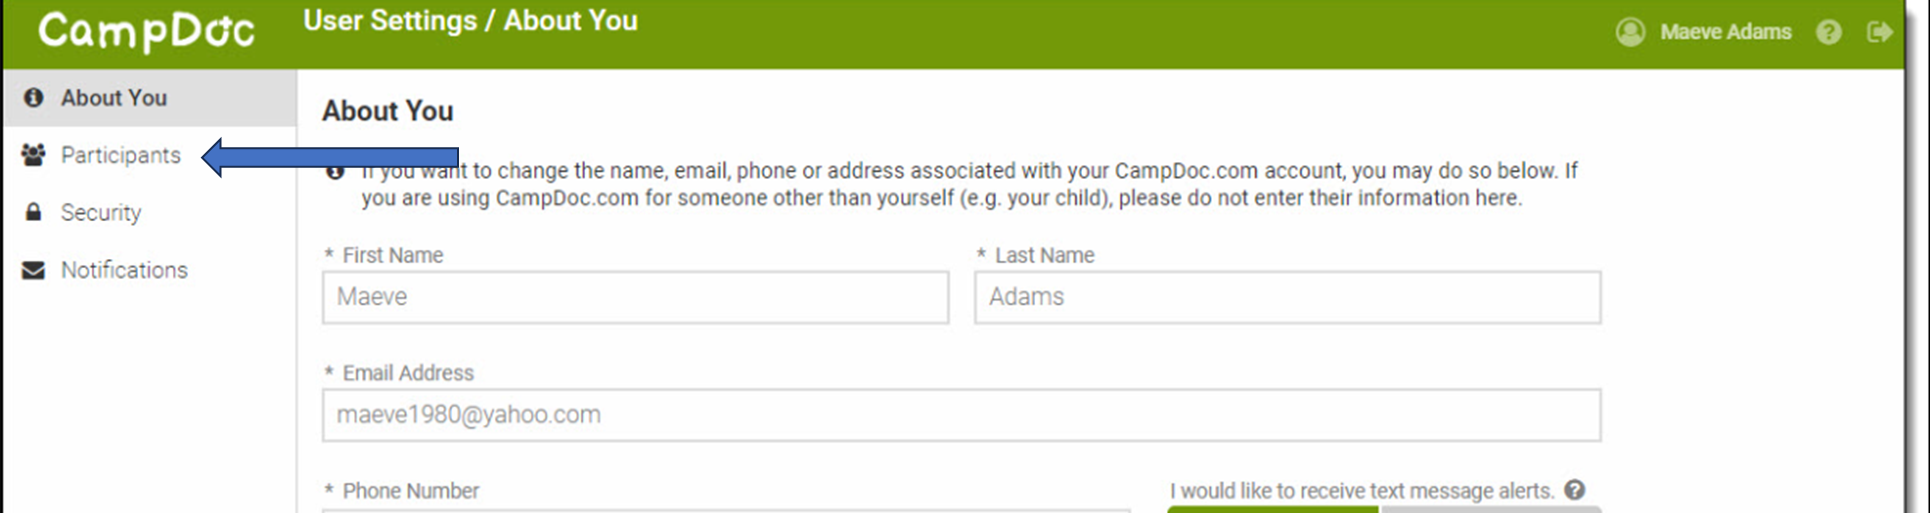 picture of the CampDoc registration portal for parents and guardians. After Completing the "About You" section, users access the participants section as step two.